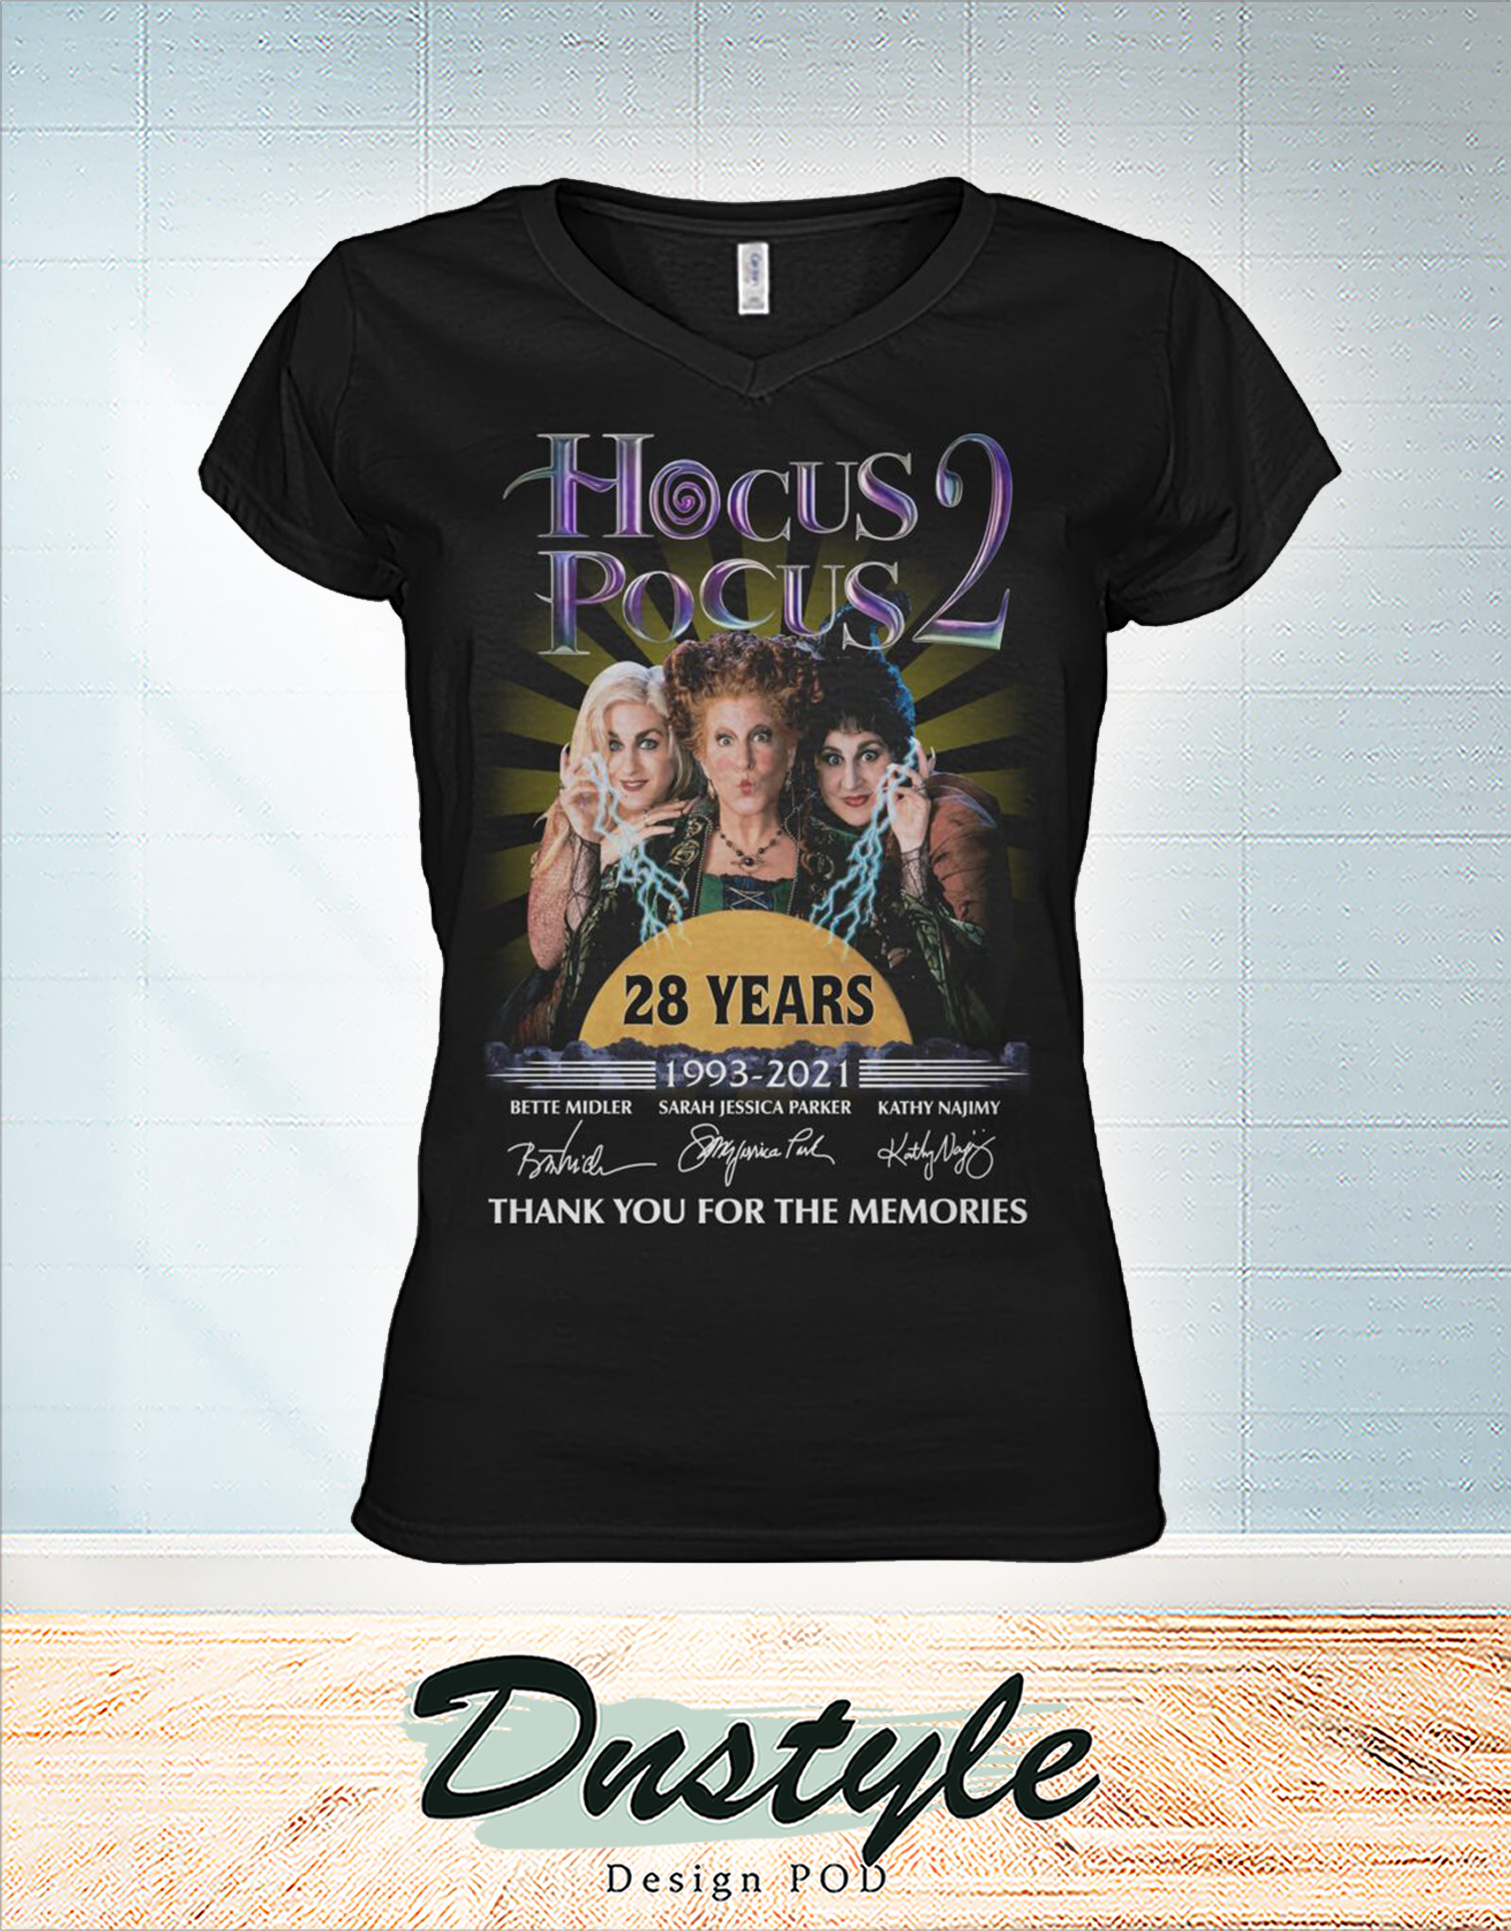 Hocus pocus 28 years thank you for the memories v-neck